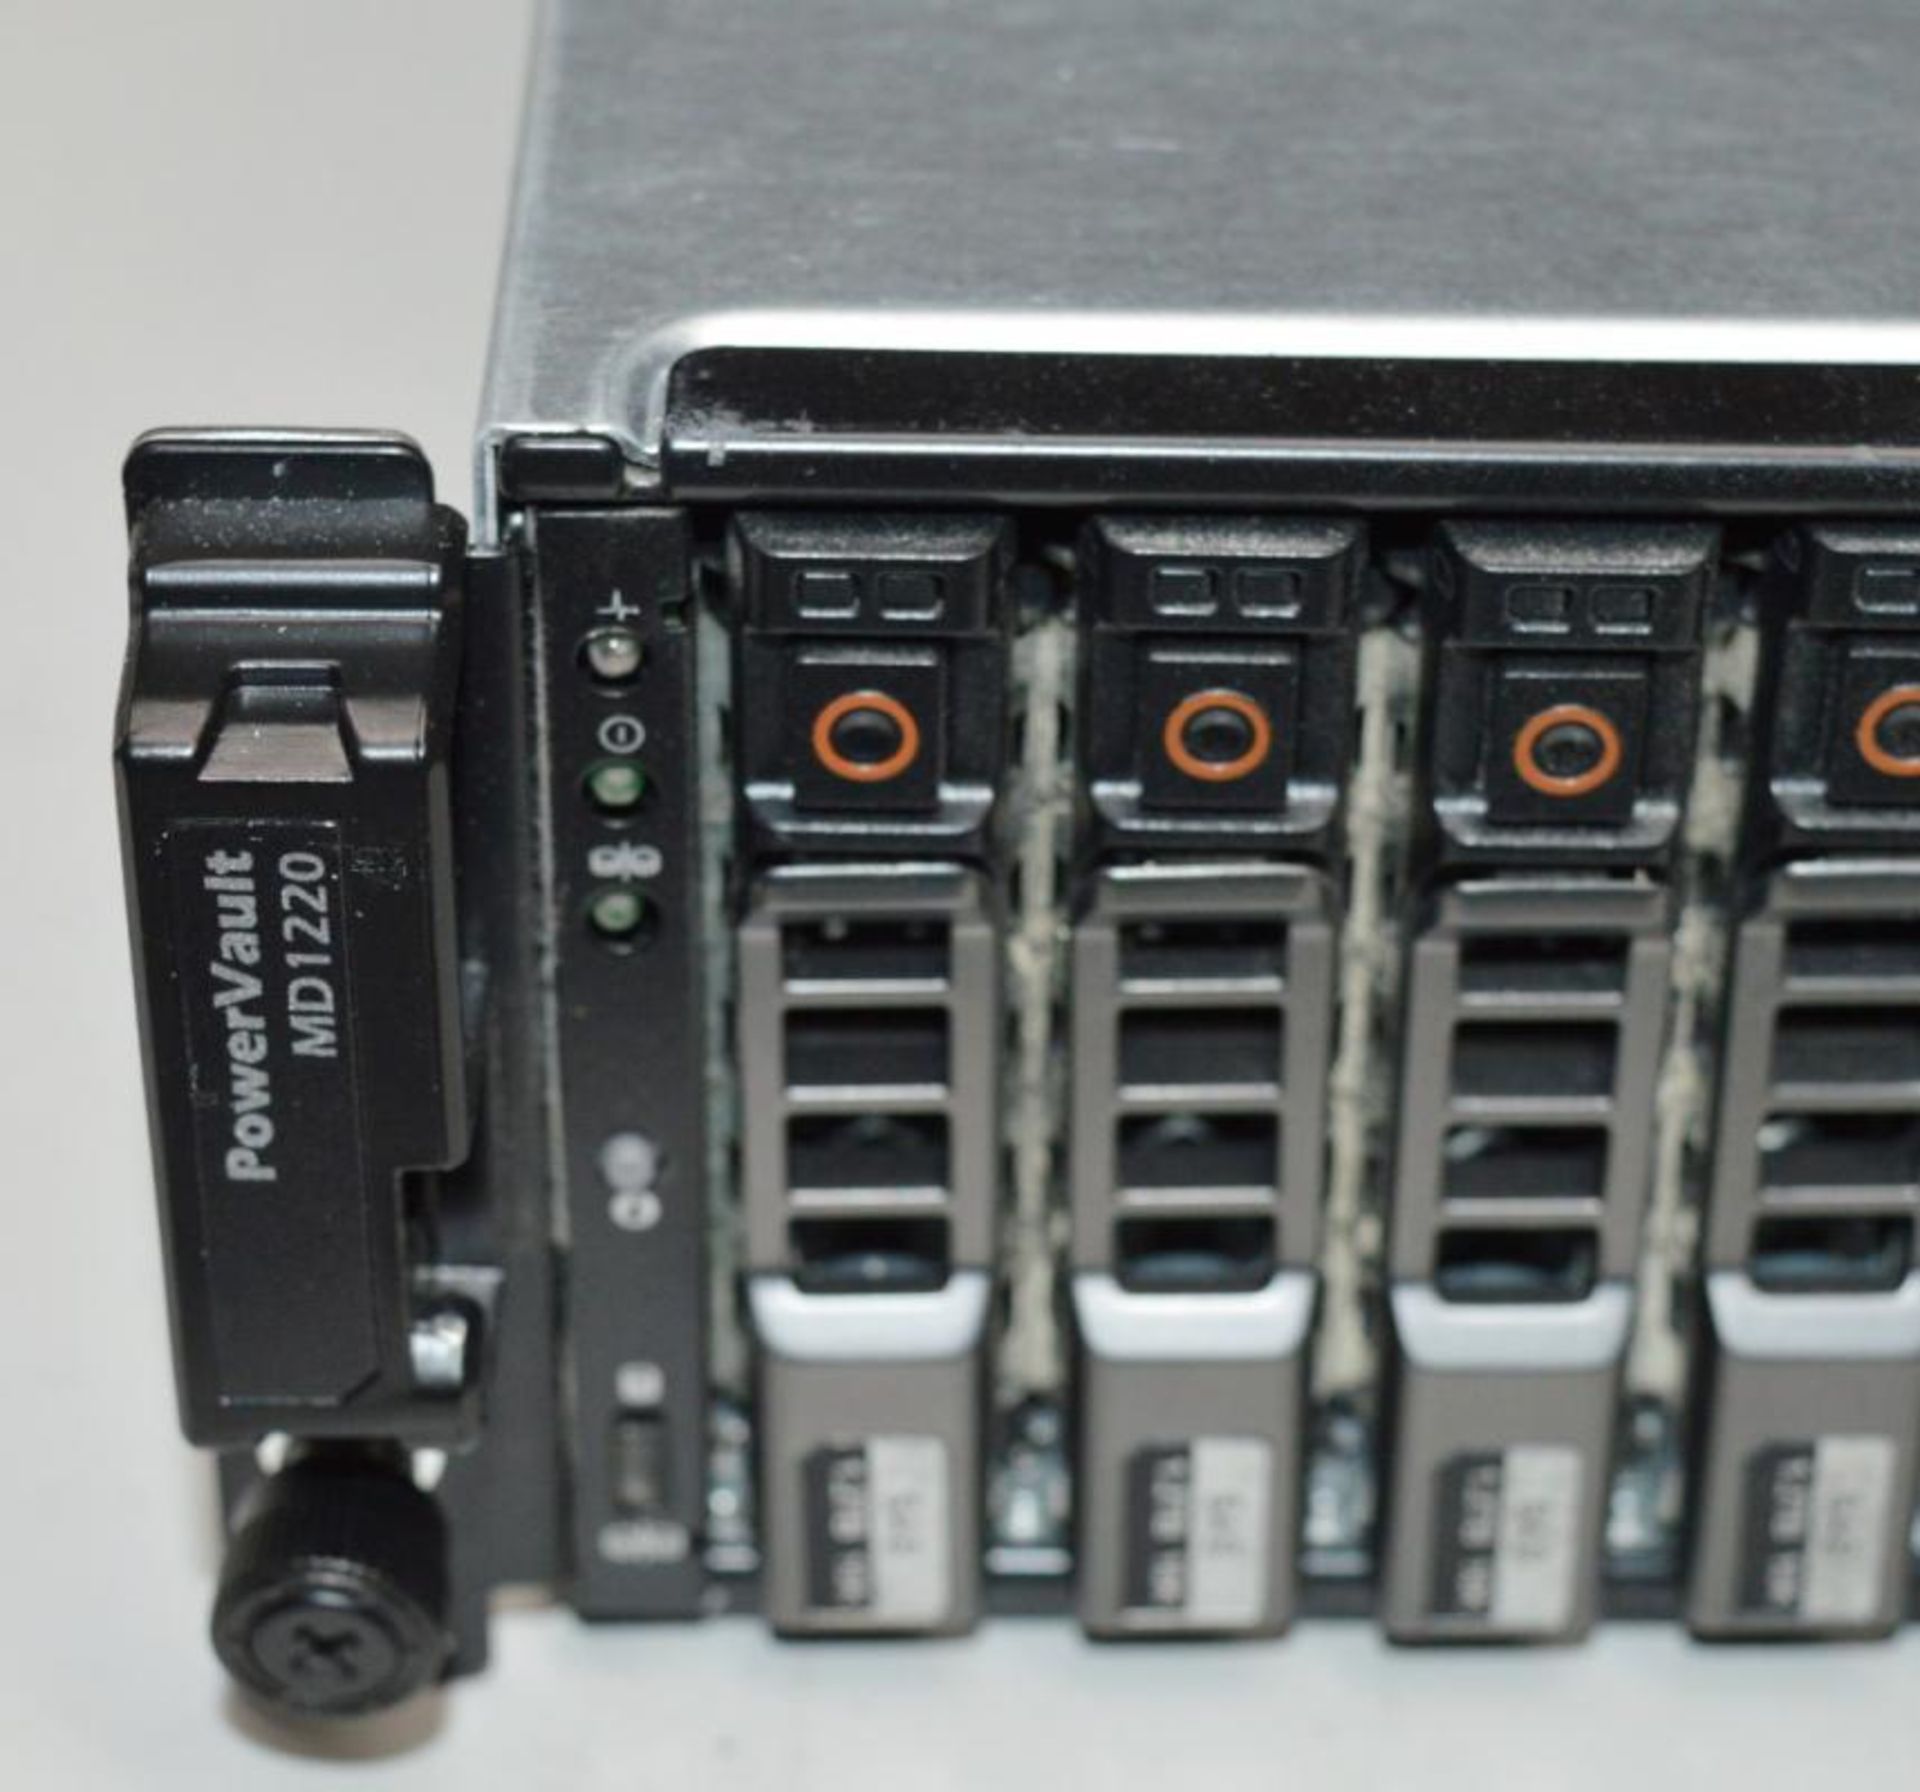 1 x Dell PowerVault MD1220 With Daul 600w PSU's and 2 x MD12 6Gb SAS Controllers - Image 8 of 8